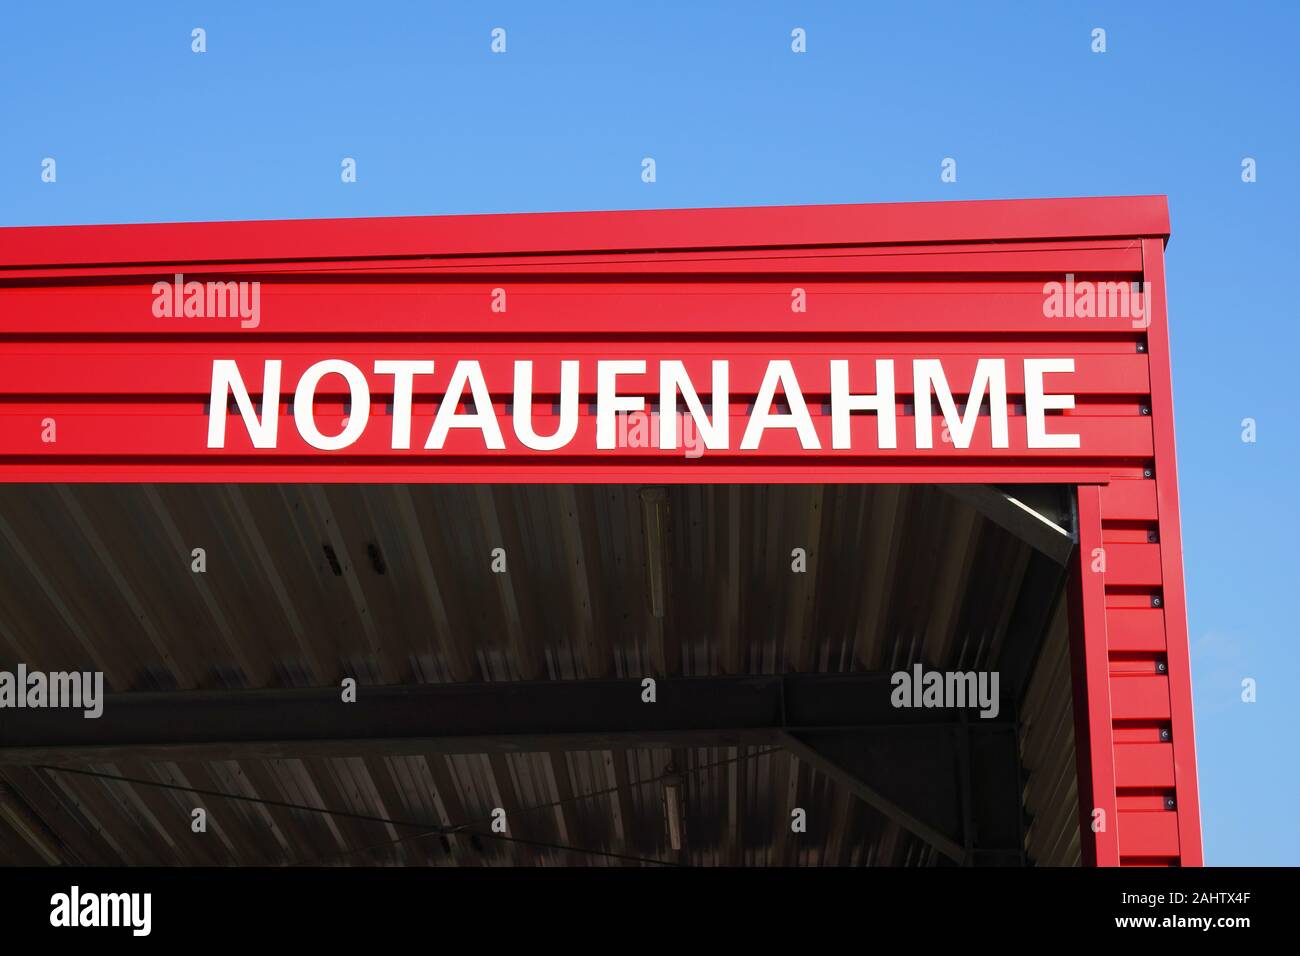 Notaufnahme translates as accident and emergency or casualty department in German - sign on hospital roof Stock Photo